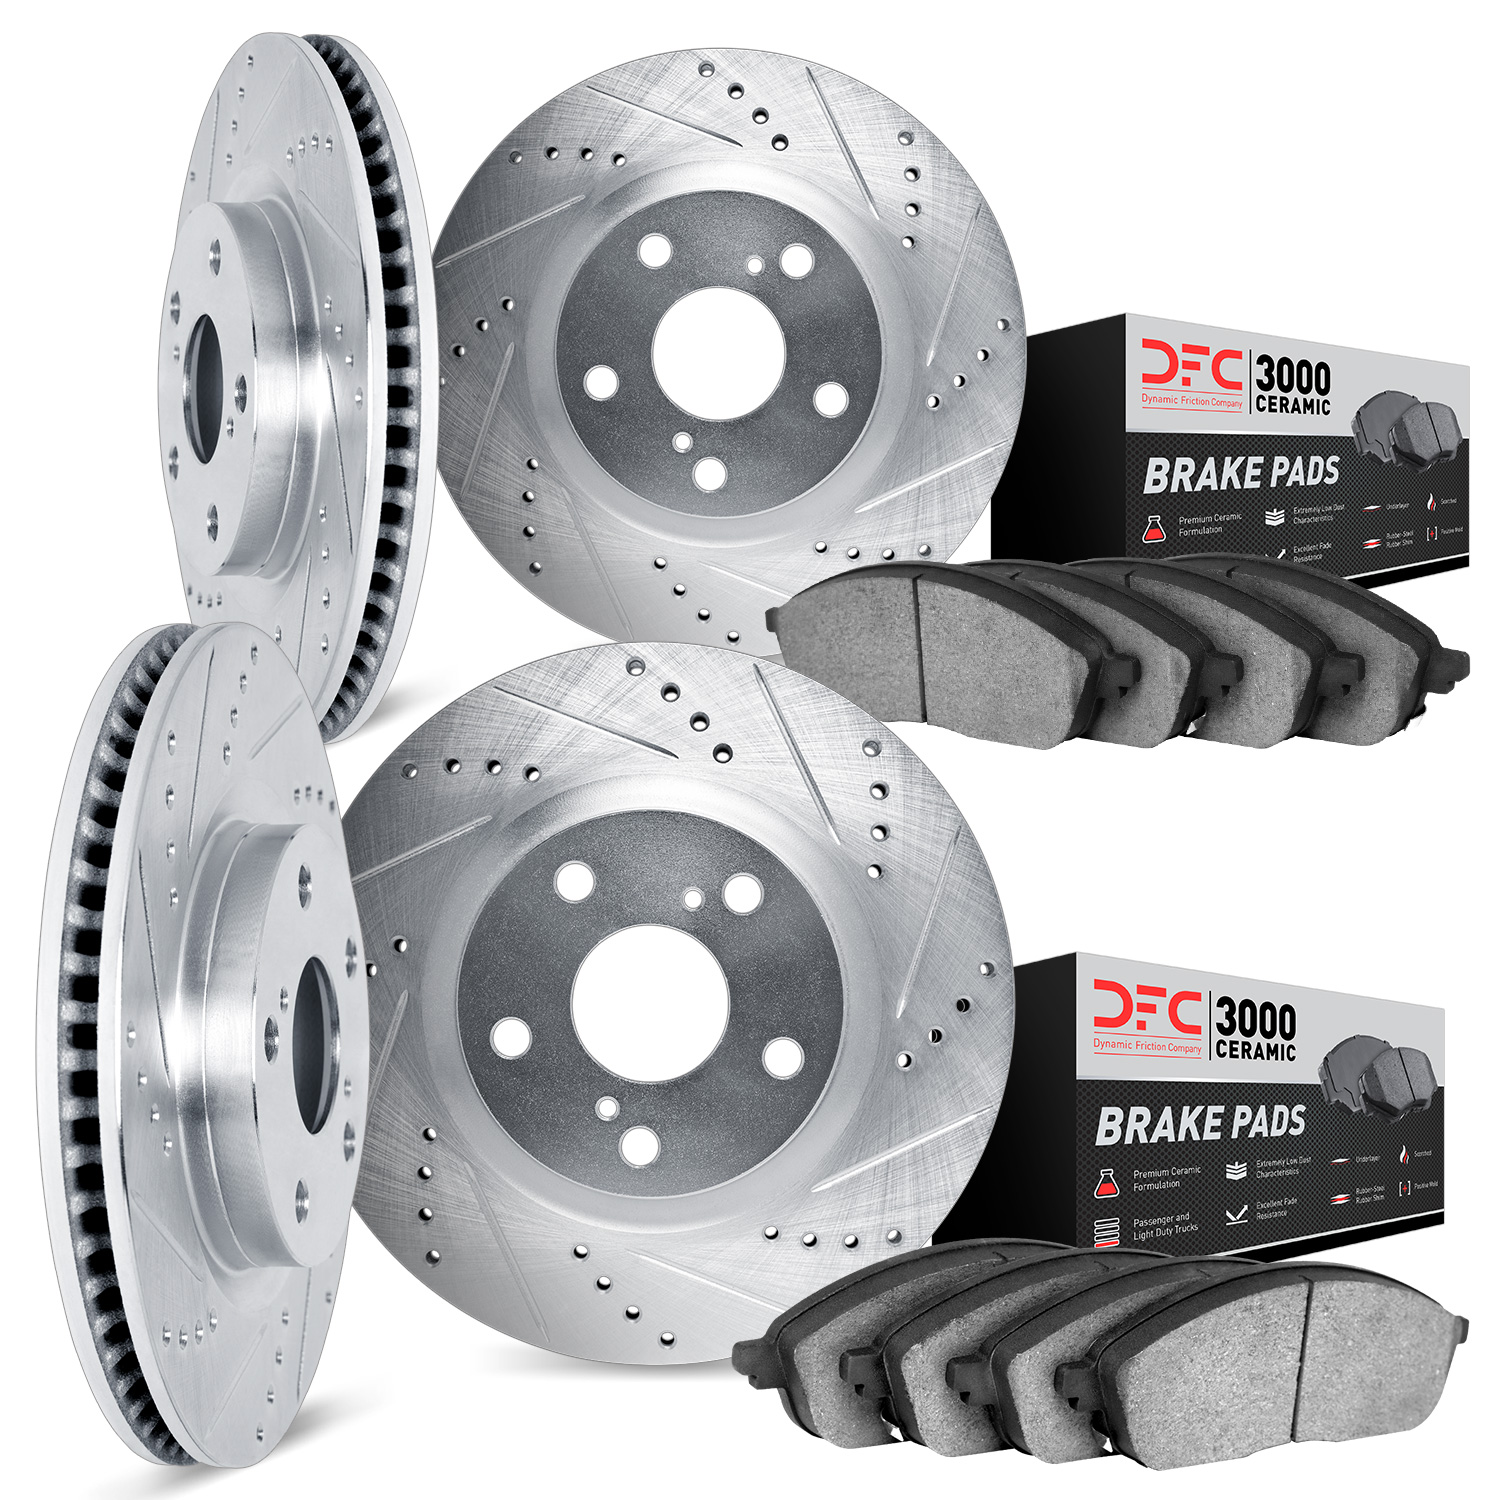 7304-54022 Drilled/Slotted Brake Rotor with 3000-Series Ceramic Brake Pads Kit [Silver], 1993-1997 Ford/Lincoln/Mercury/Mazda, P